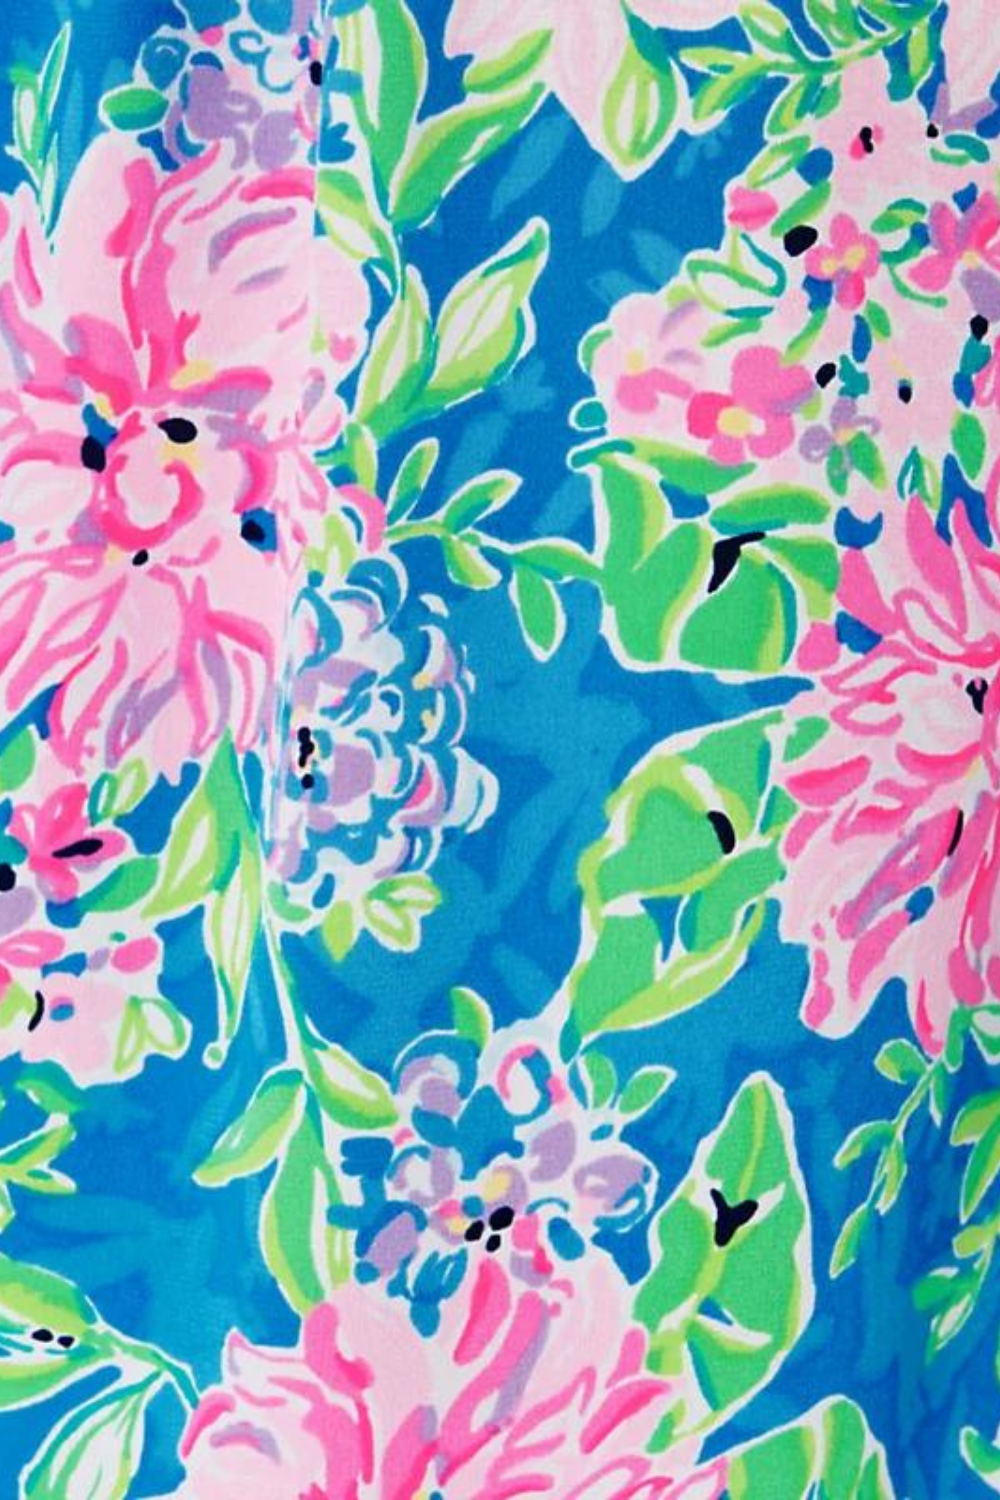 Lilly Pulitzer Elsa Top - Spring in Your Step